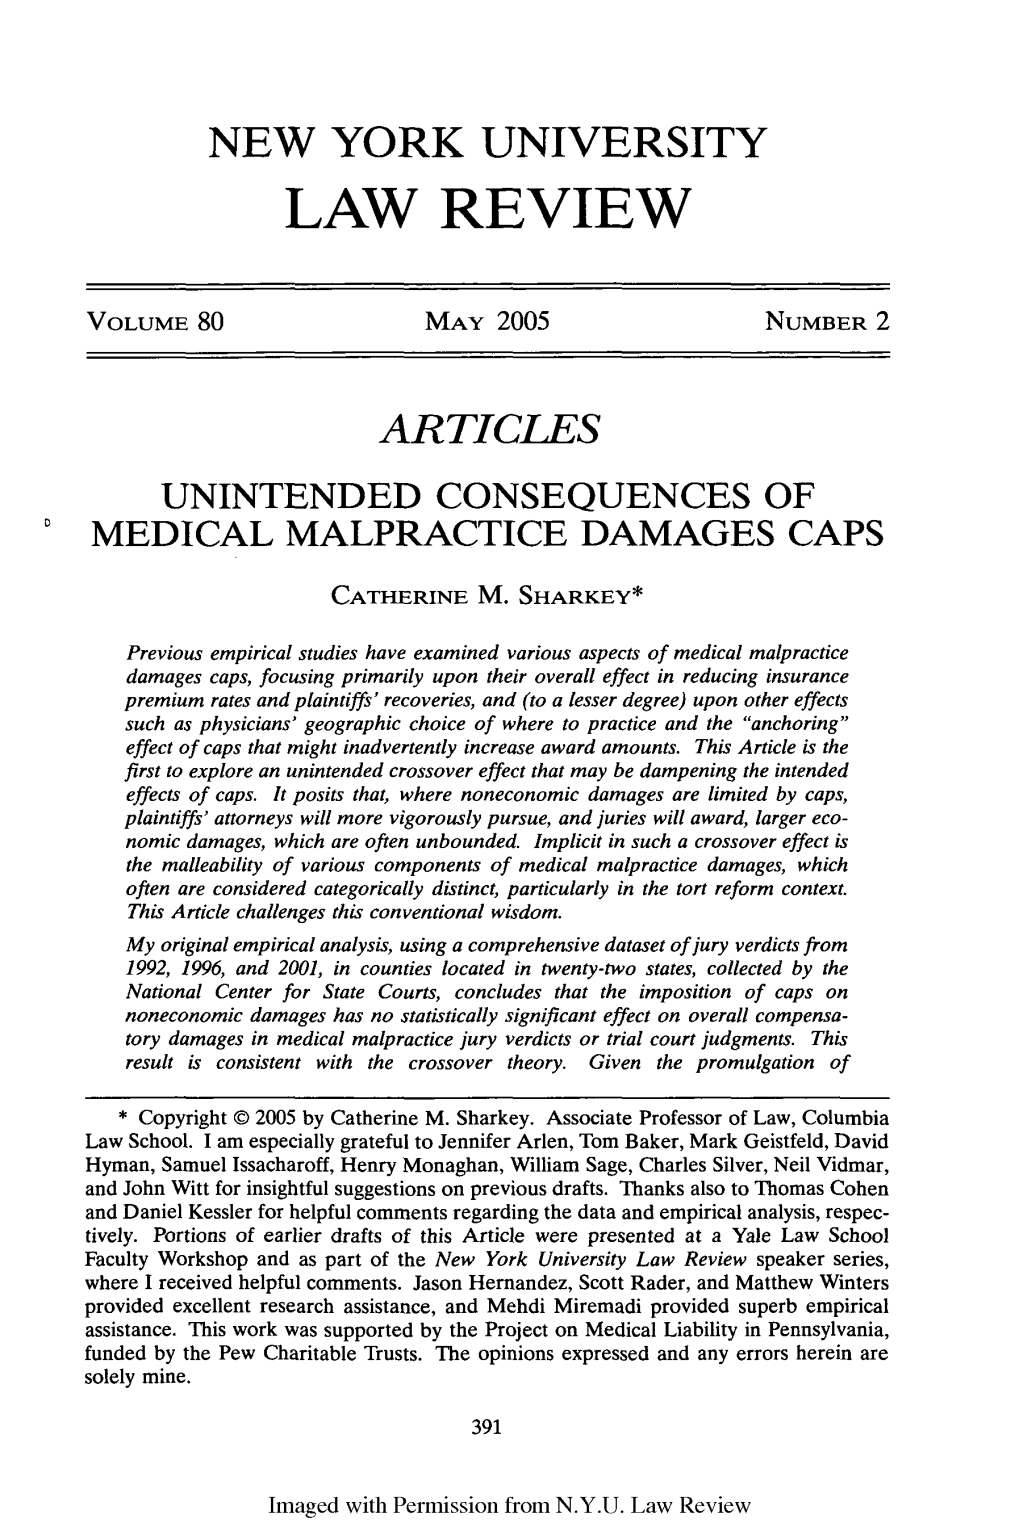 Unintended Consequences of Medical Malpractice Damages Caps